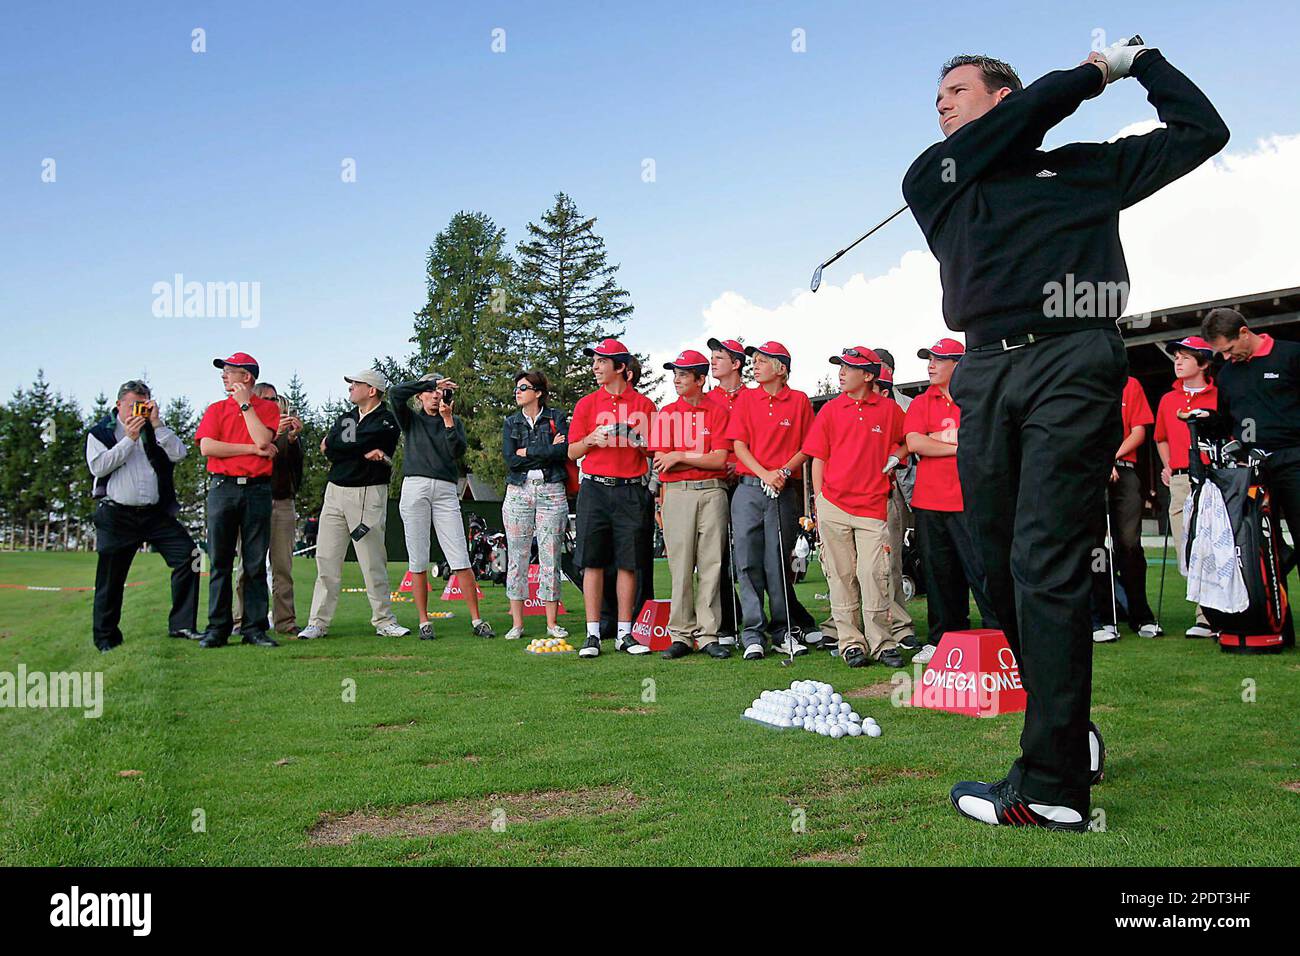 Sergio Garcia from Spain, right, winner of the last Omega European Masters  golf tournament, tees off as he is watched by 18 young golfers from  Switzerland, playing during the "Omega Juniors Challenge"